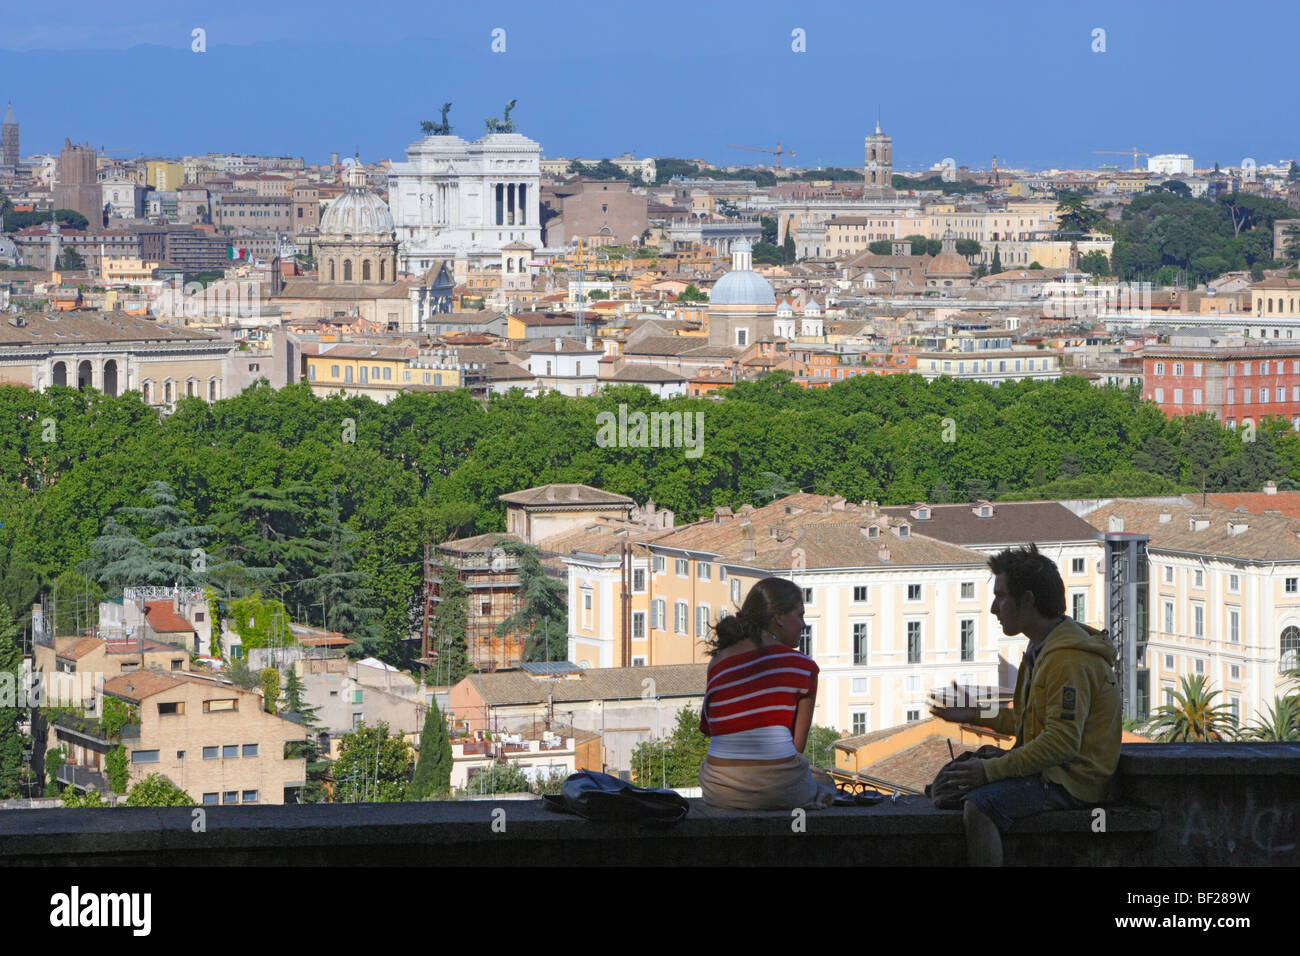 Two people sitting on a wall, view over the town of Rome, Italy, Europe Stock Photo